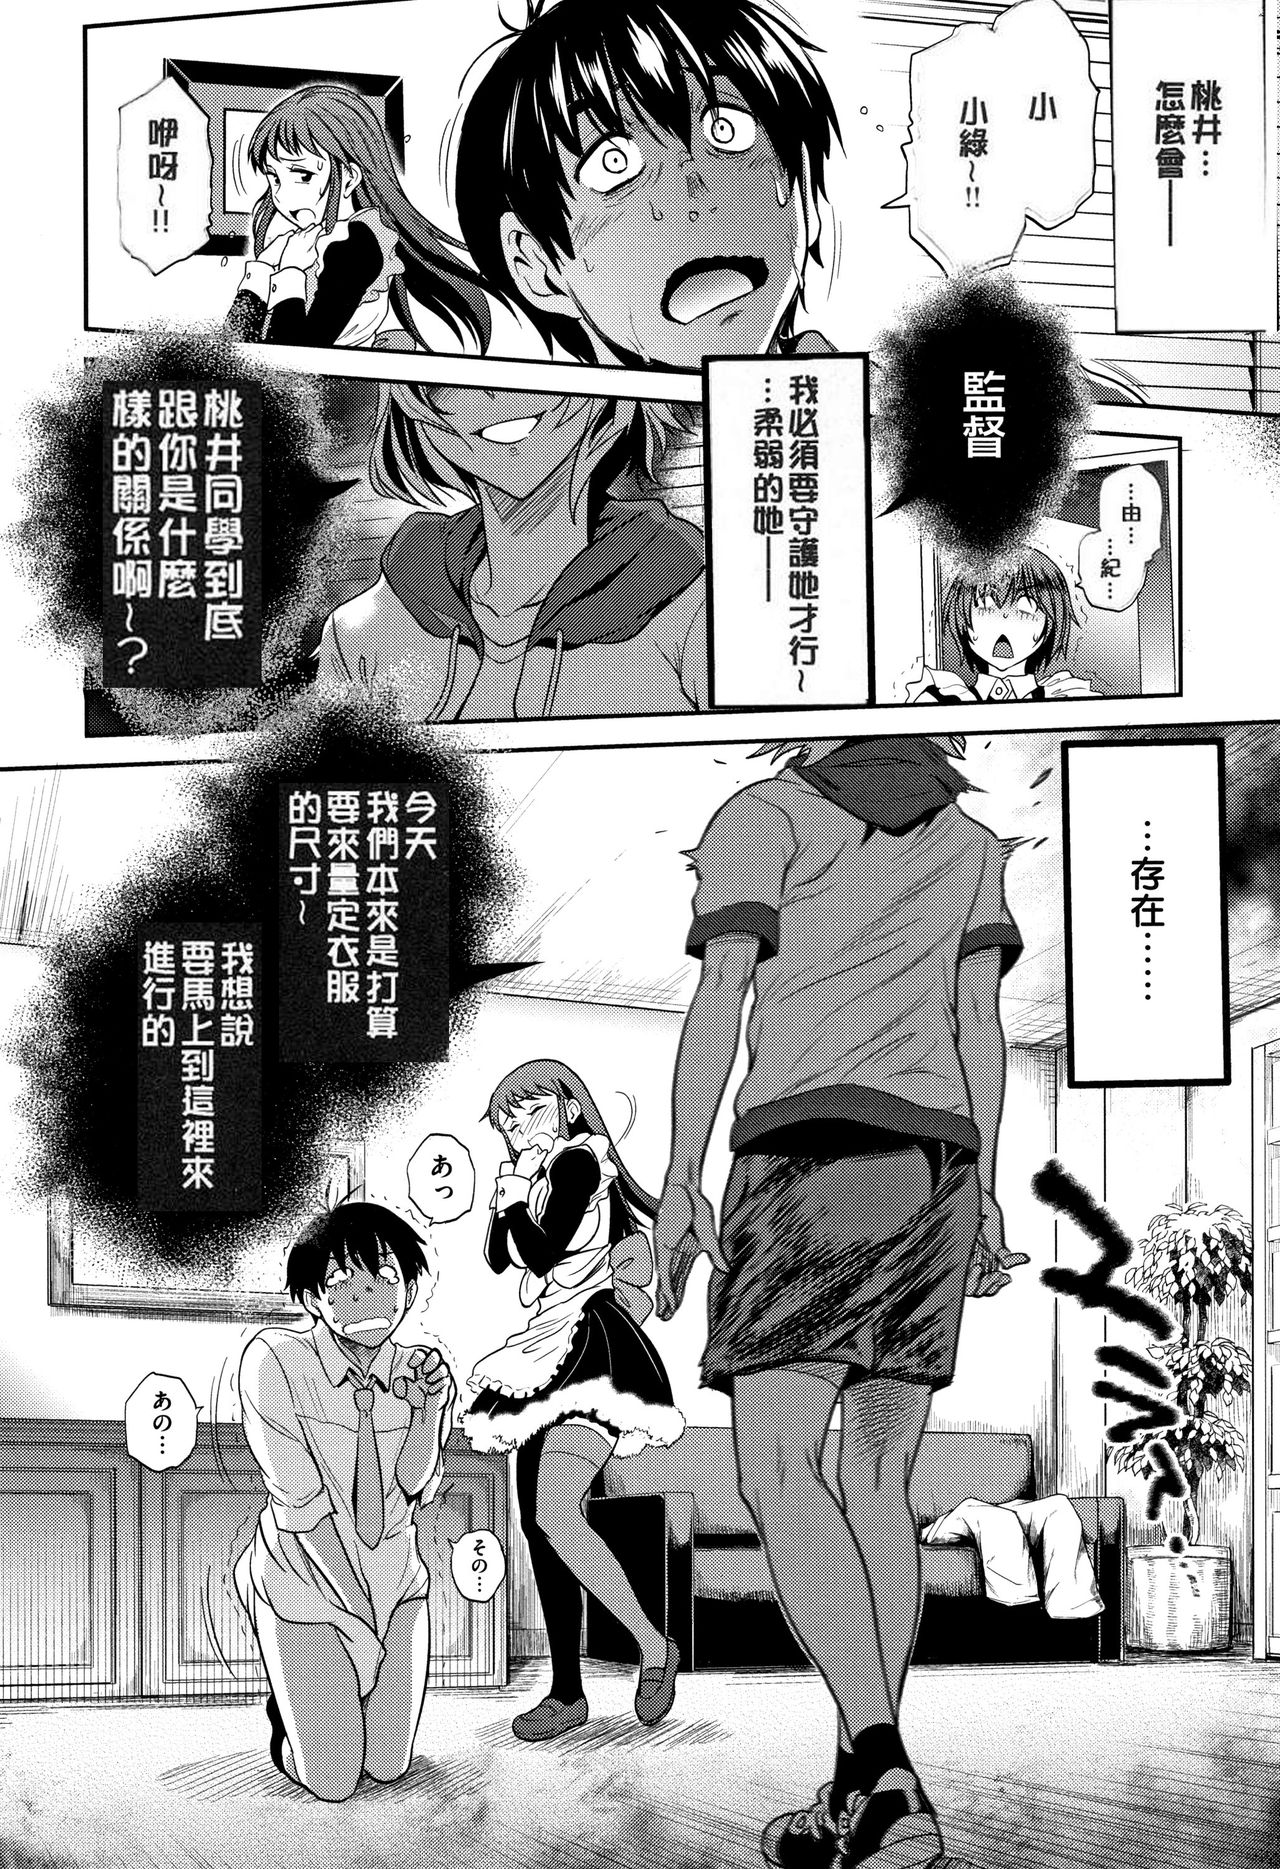 [DISTANCE] Jyoshi Luck! ~2 Years Later~ 2 [Chinese] [黑哥哥個人PS漢化版] page 13 full